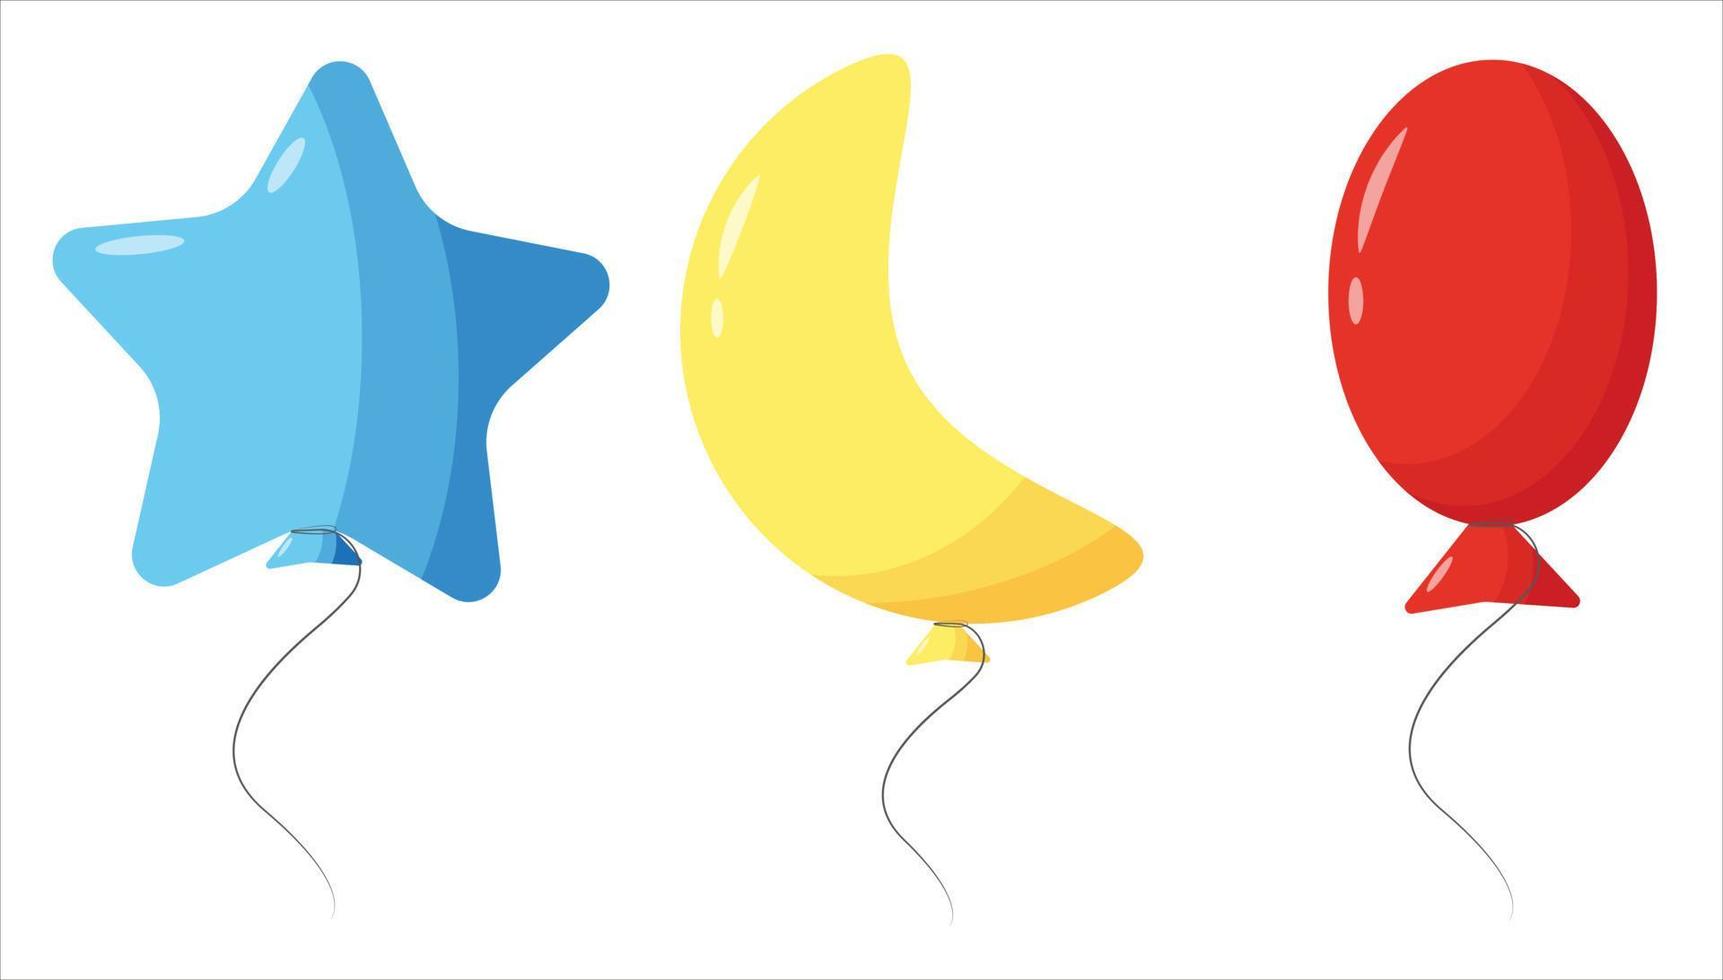 A bunch of vector gel balloons for decorating a holiday on a white background. Floating balloons in the air, colored gift decorations for birthday parties and celebrations.